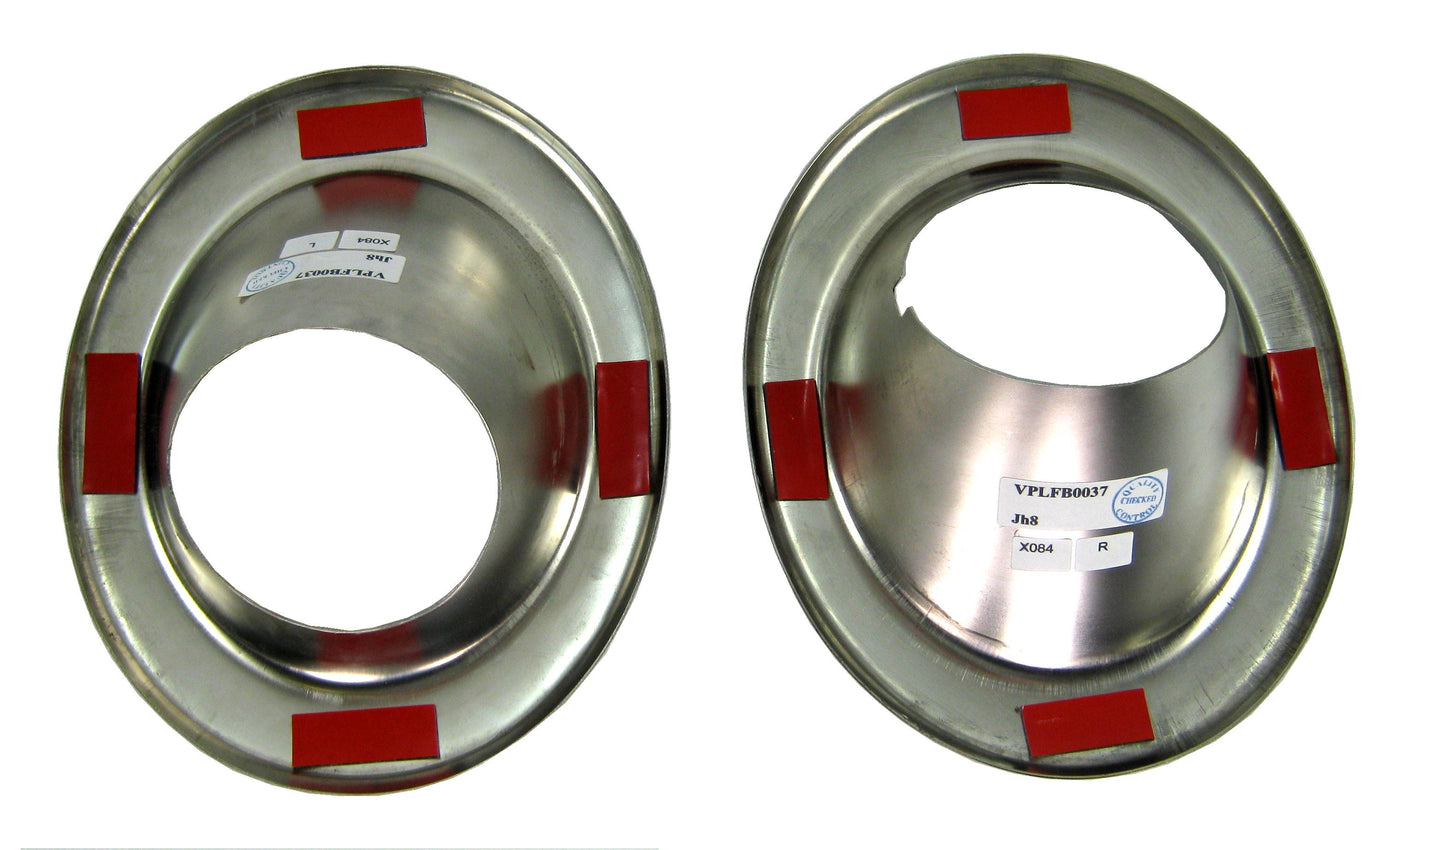 Front Bumper Fog Lamp Covers in Stainless Steel for Land Rover Freelander 2 - PAIR